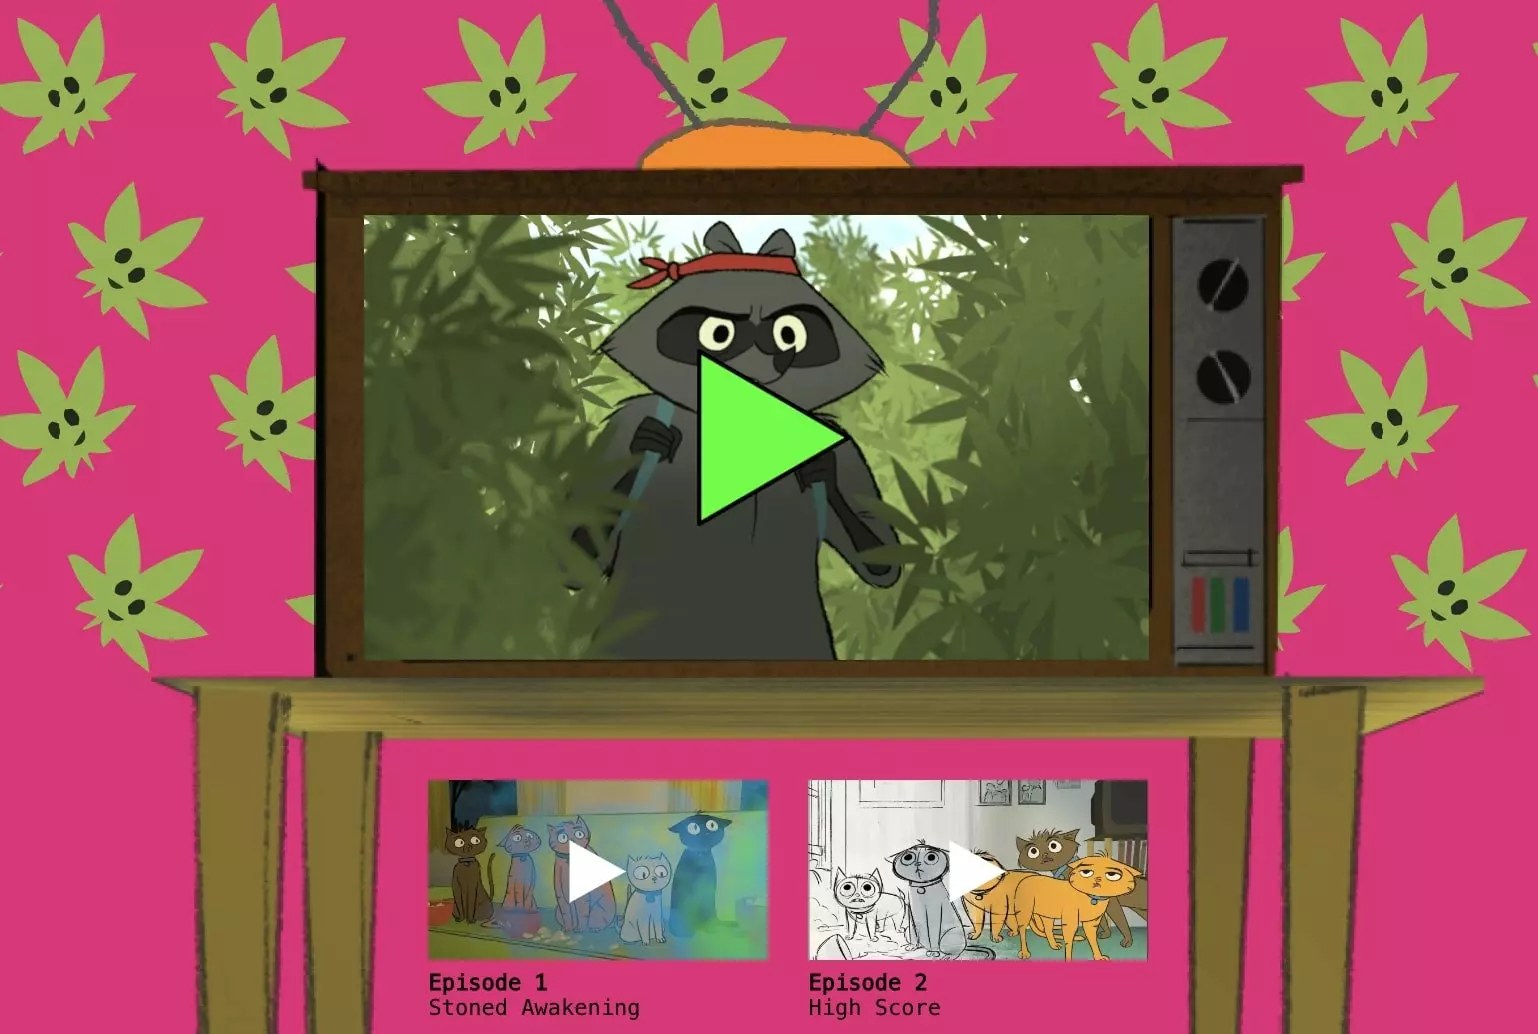 An animated cat on a TV walking through a forest